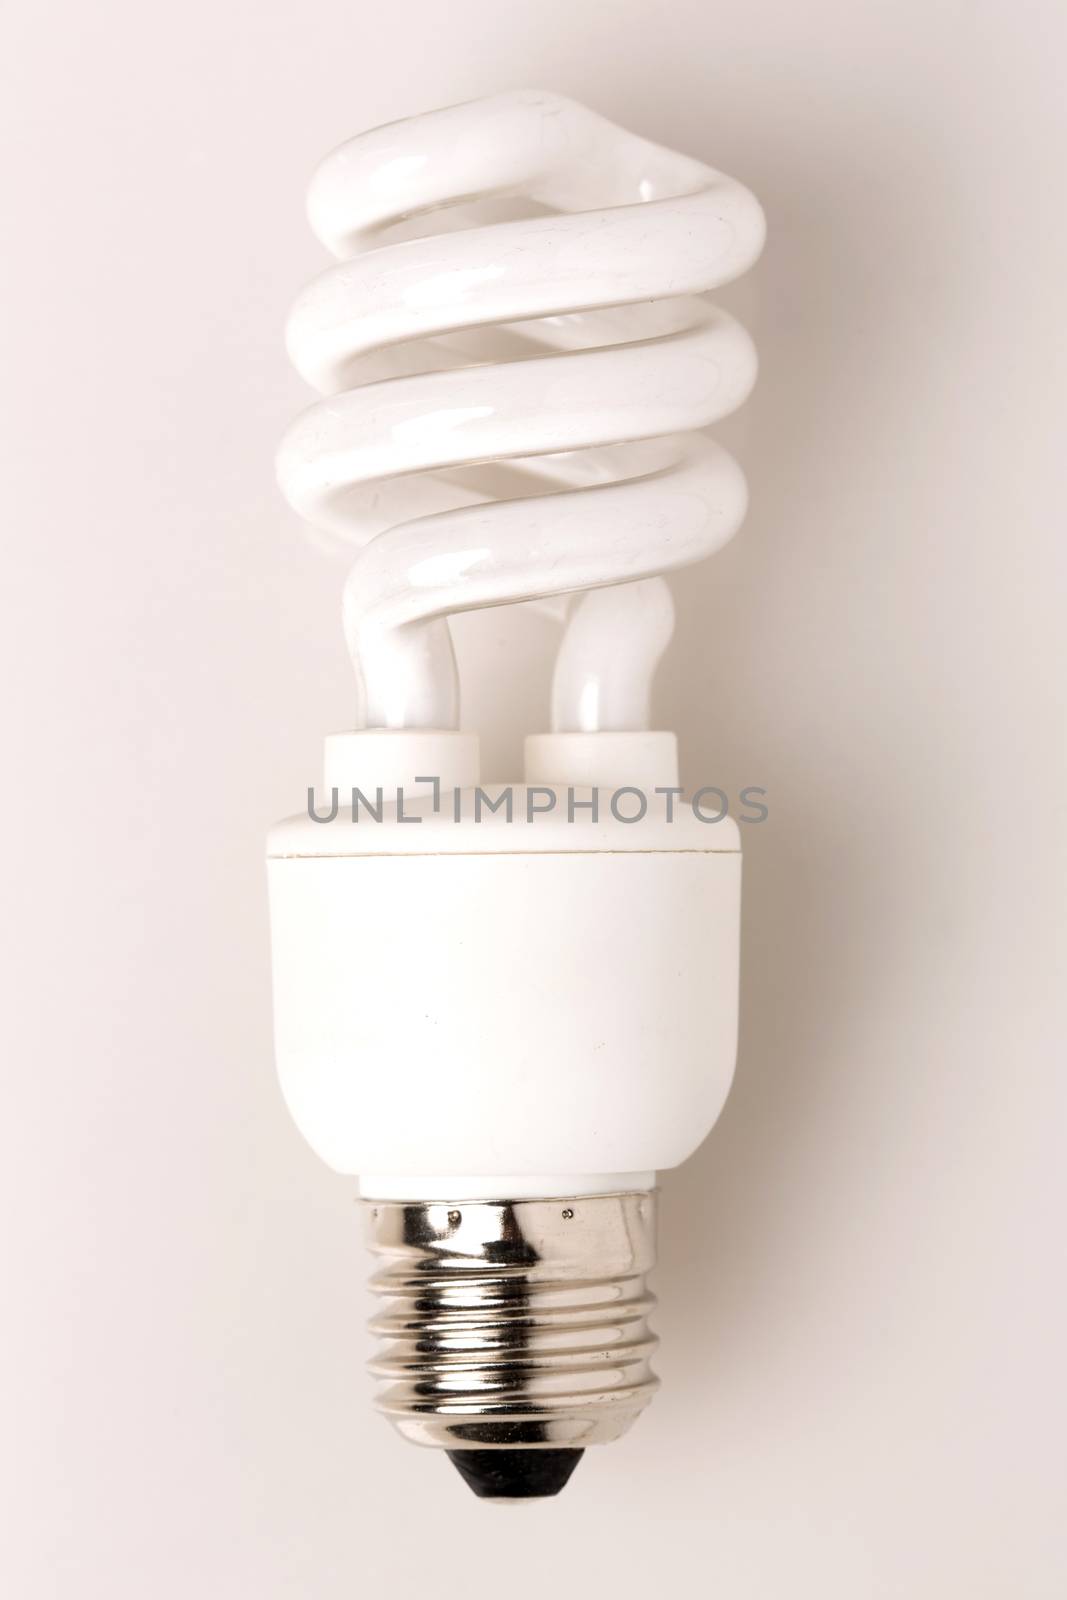 Compact fluorescent lamp (CFL) by stockyimages